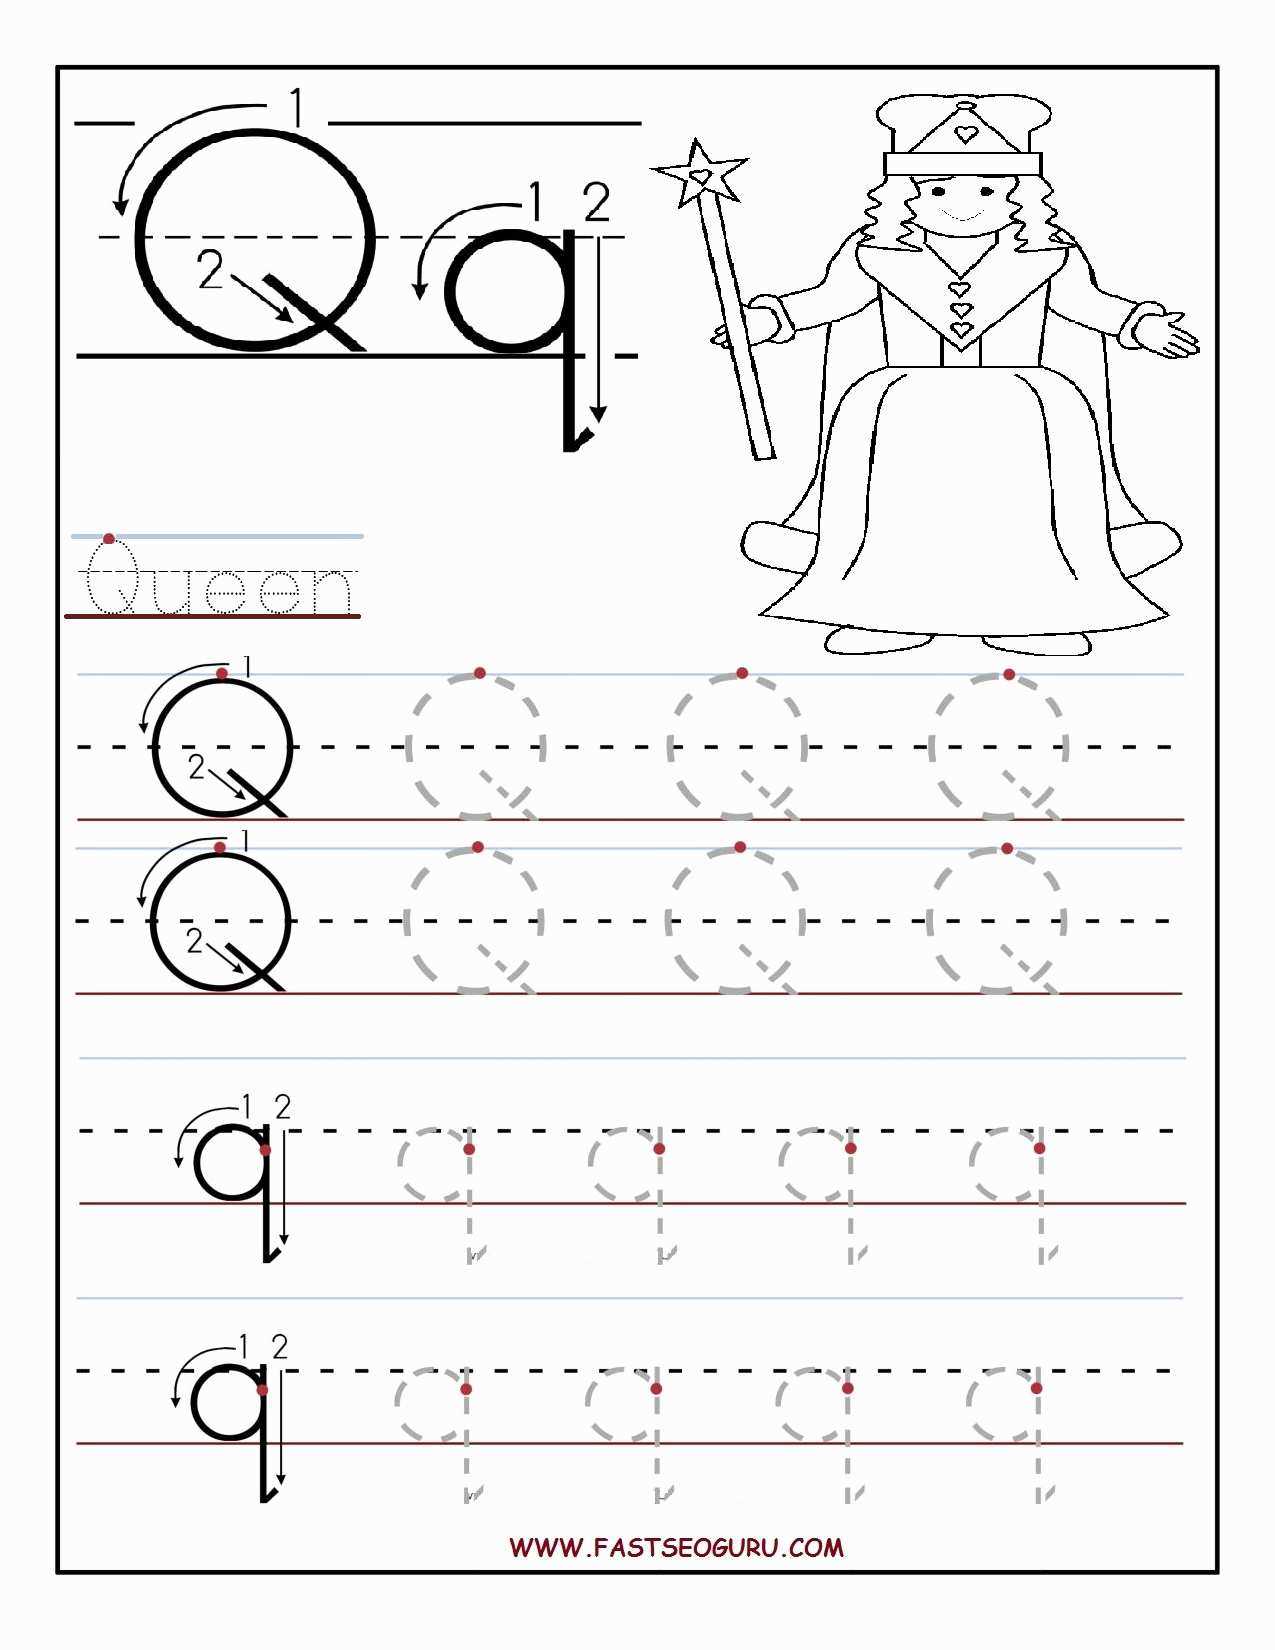 Alphabet Tracing Worksheets for 3 Year Olds with Free Cover Letter Templates Free Letter Z Template Copy Preschool